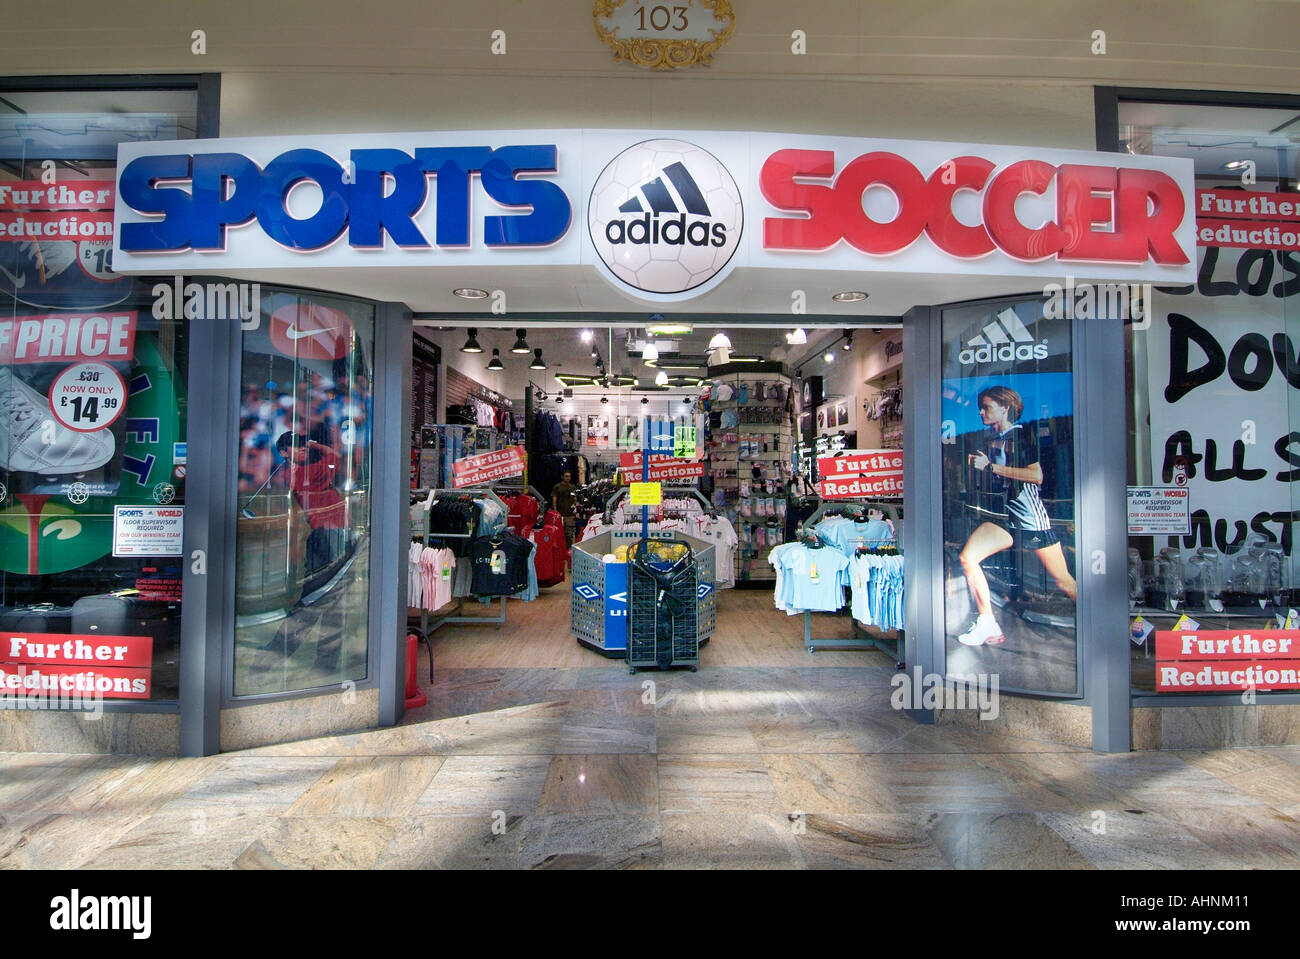 Sports soccer store retail store UK 